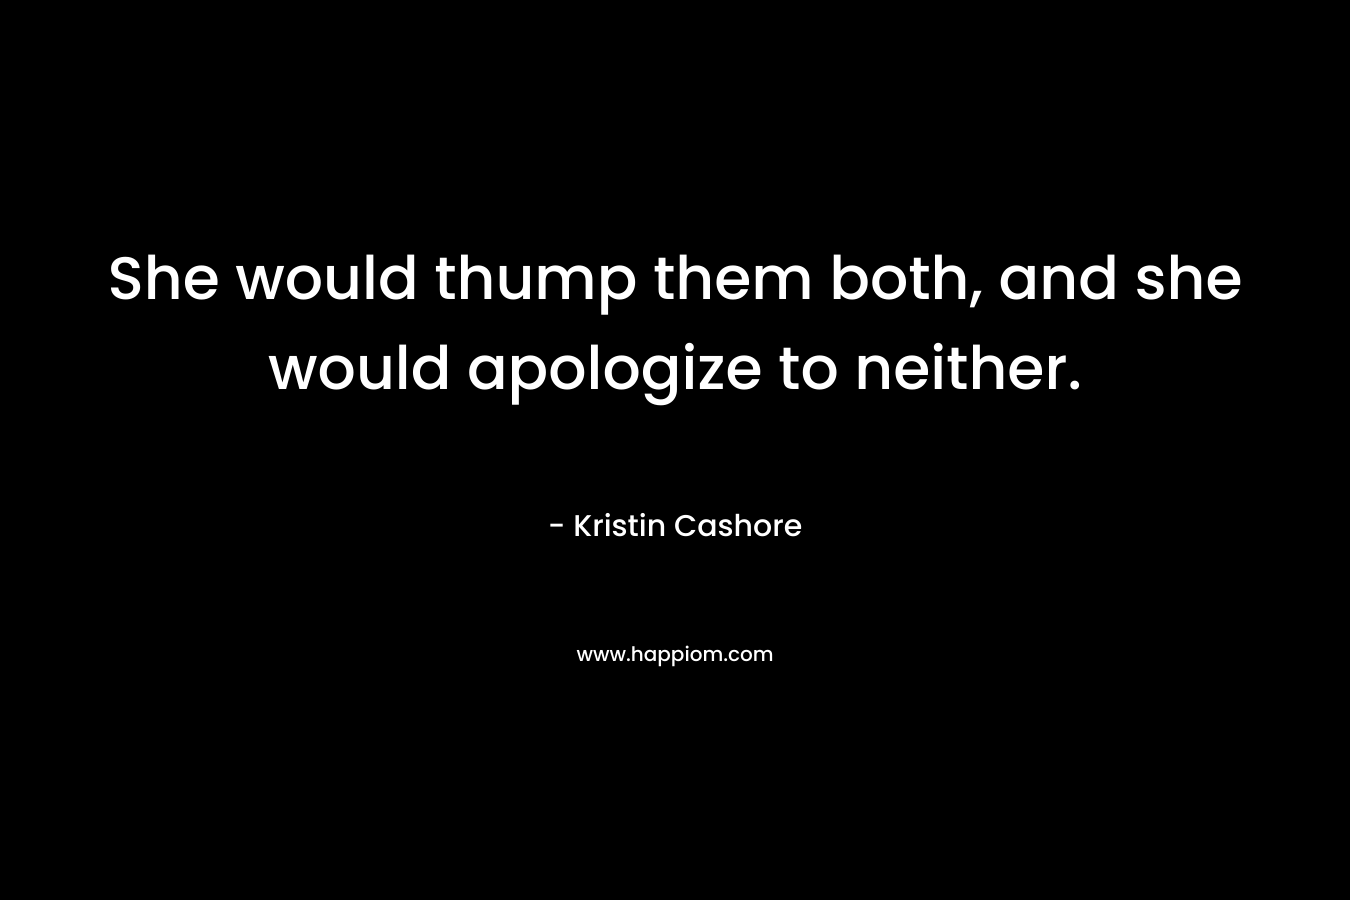 She would thump them both, and she would apologize to neither.